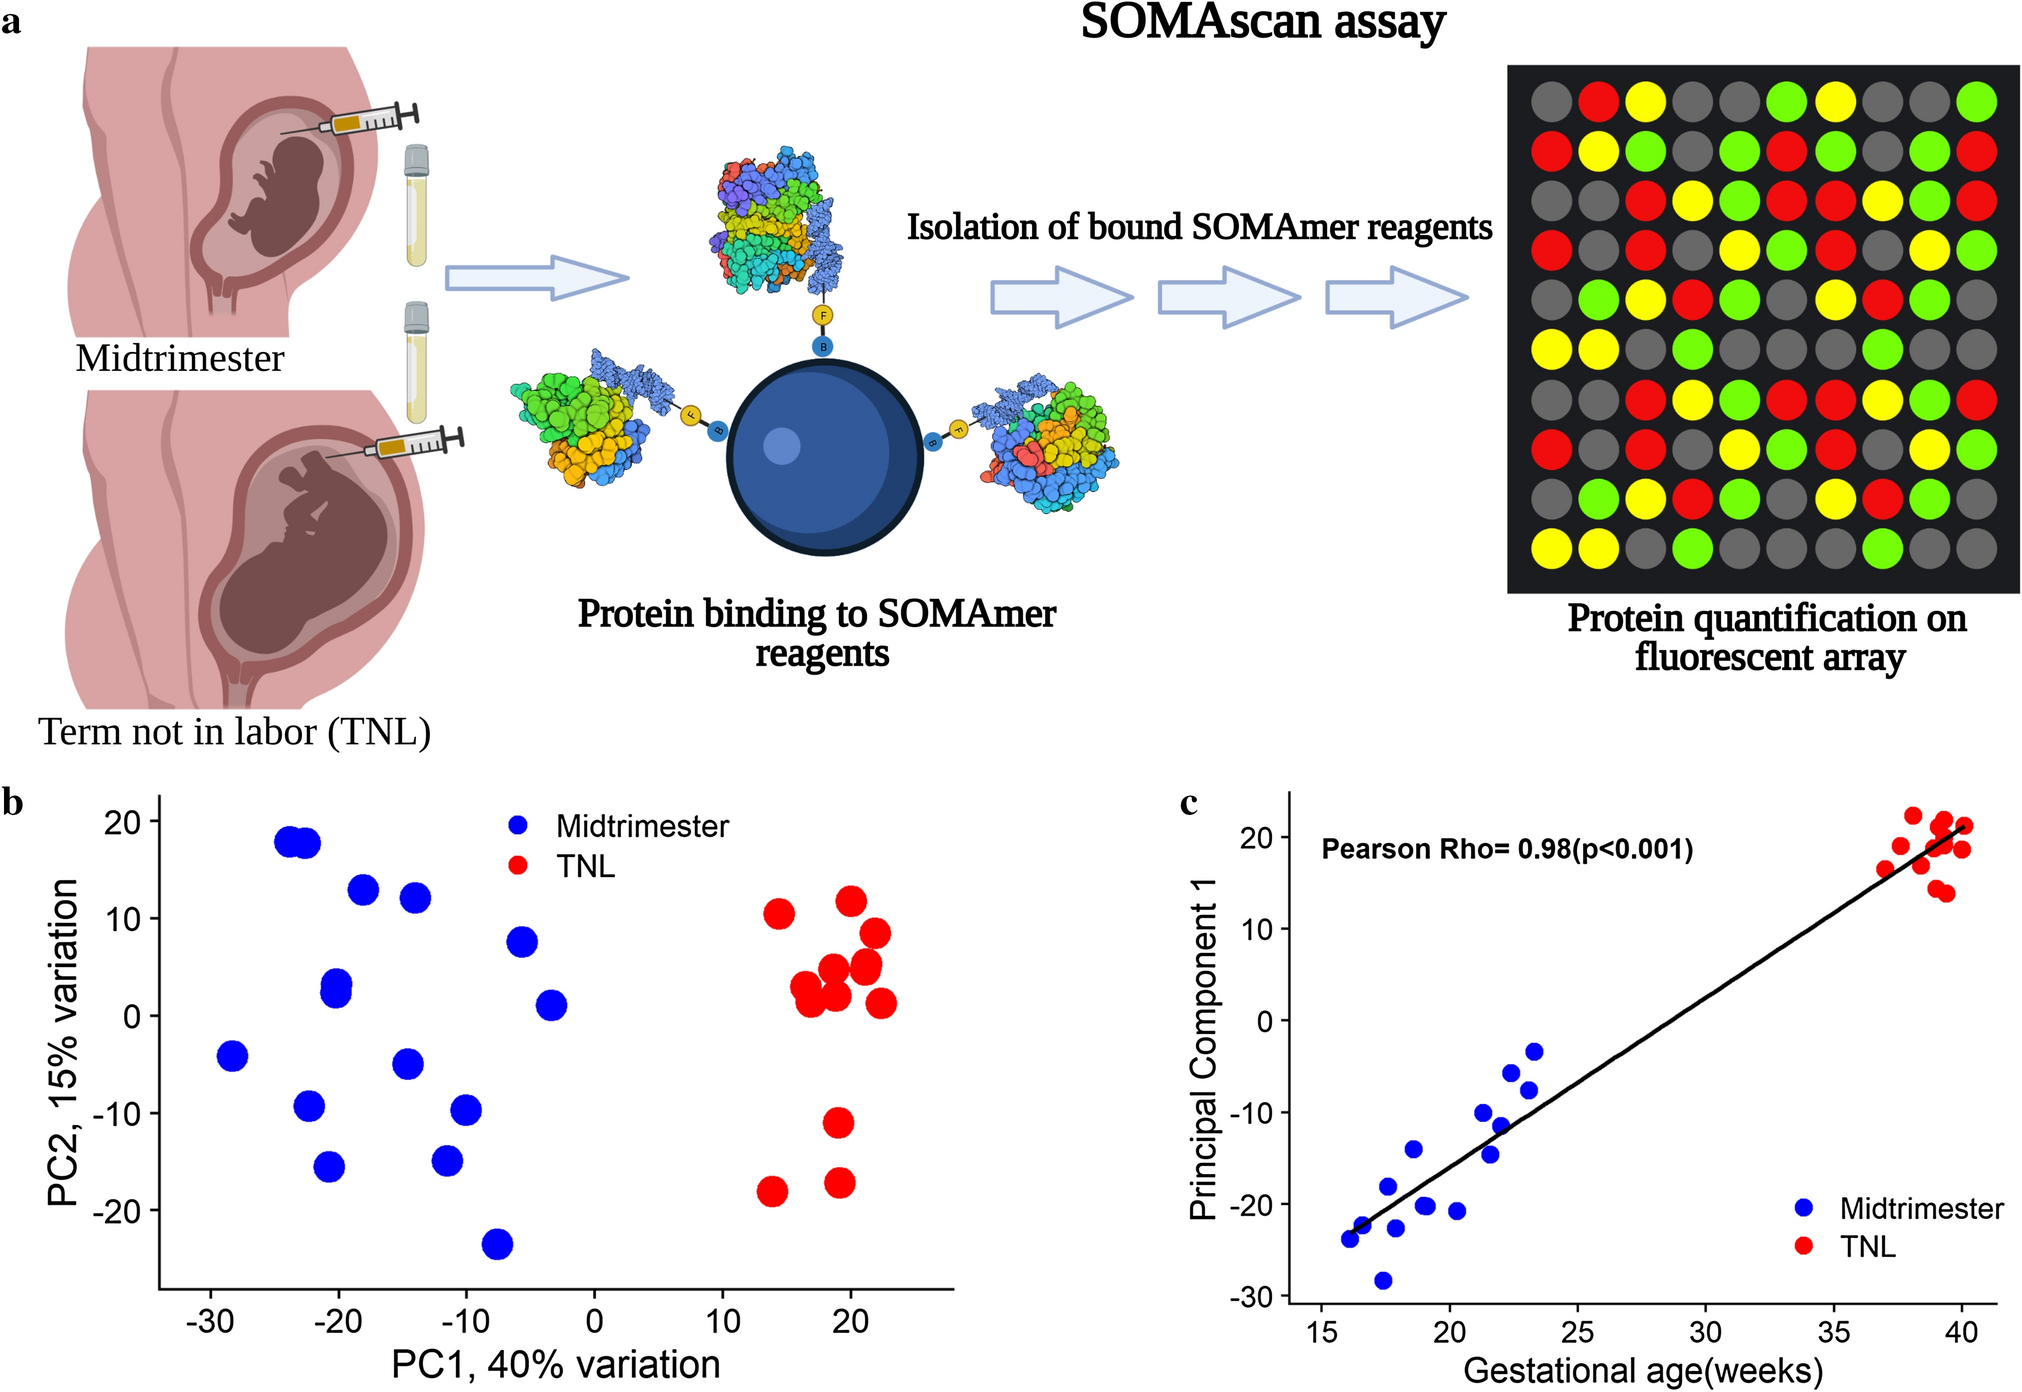 The amniotic fluid proteome changes with gestational age in normal pregnancy:  a cross-sectional study | Scientific Reports